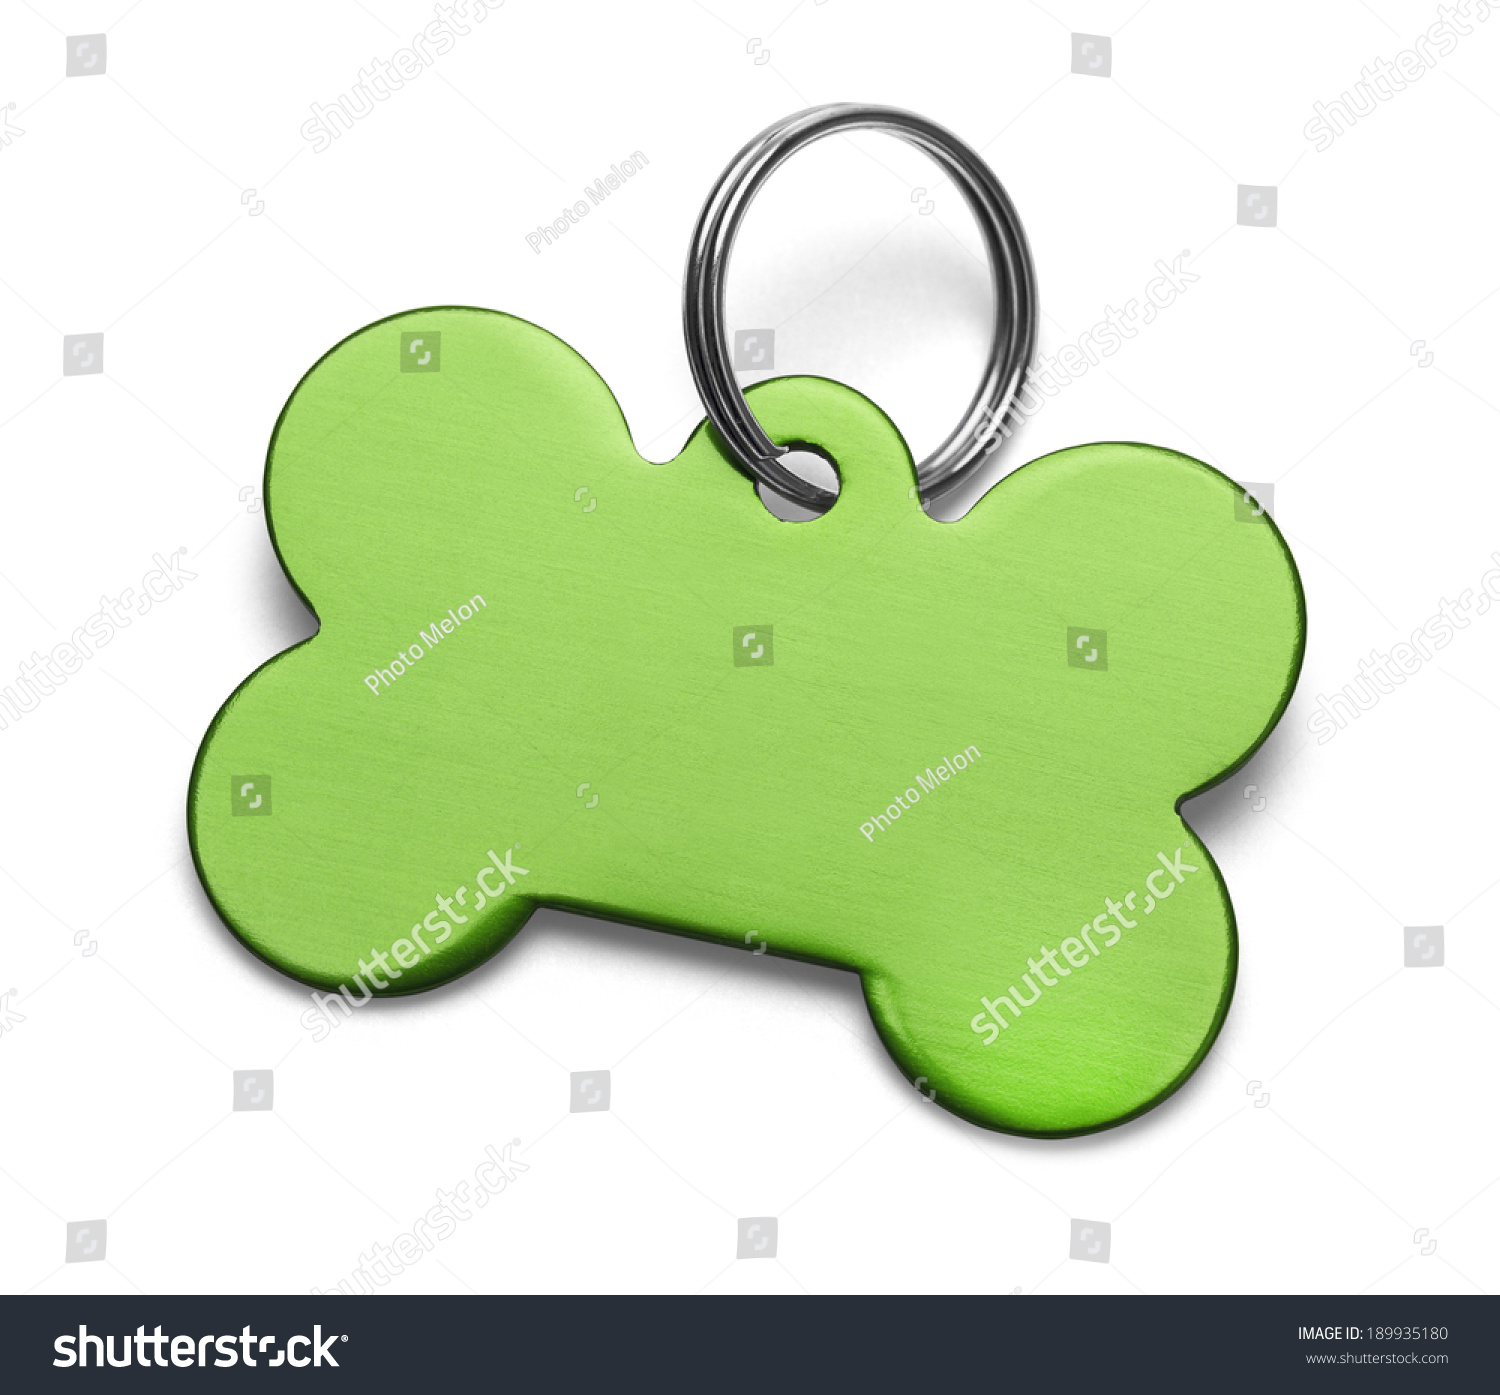 Blank Metal Bone Dog Tag With Ring Isolated on White Background. #189935180